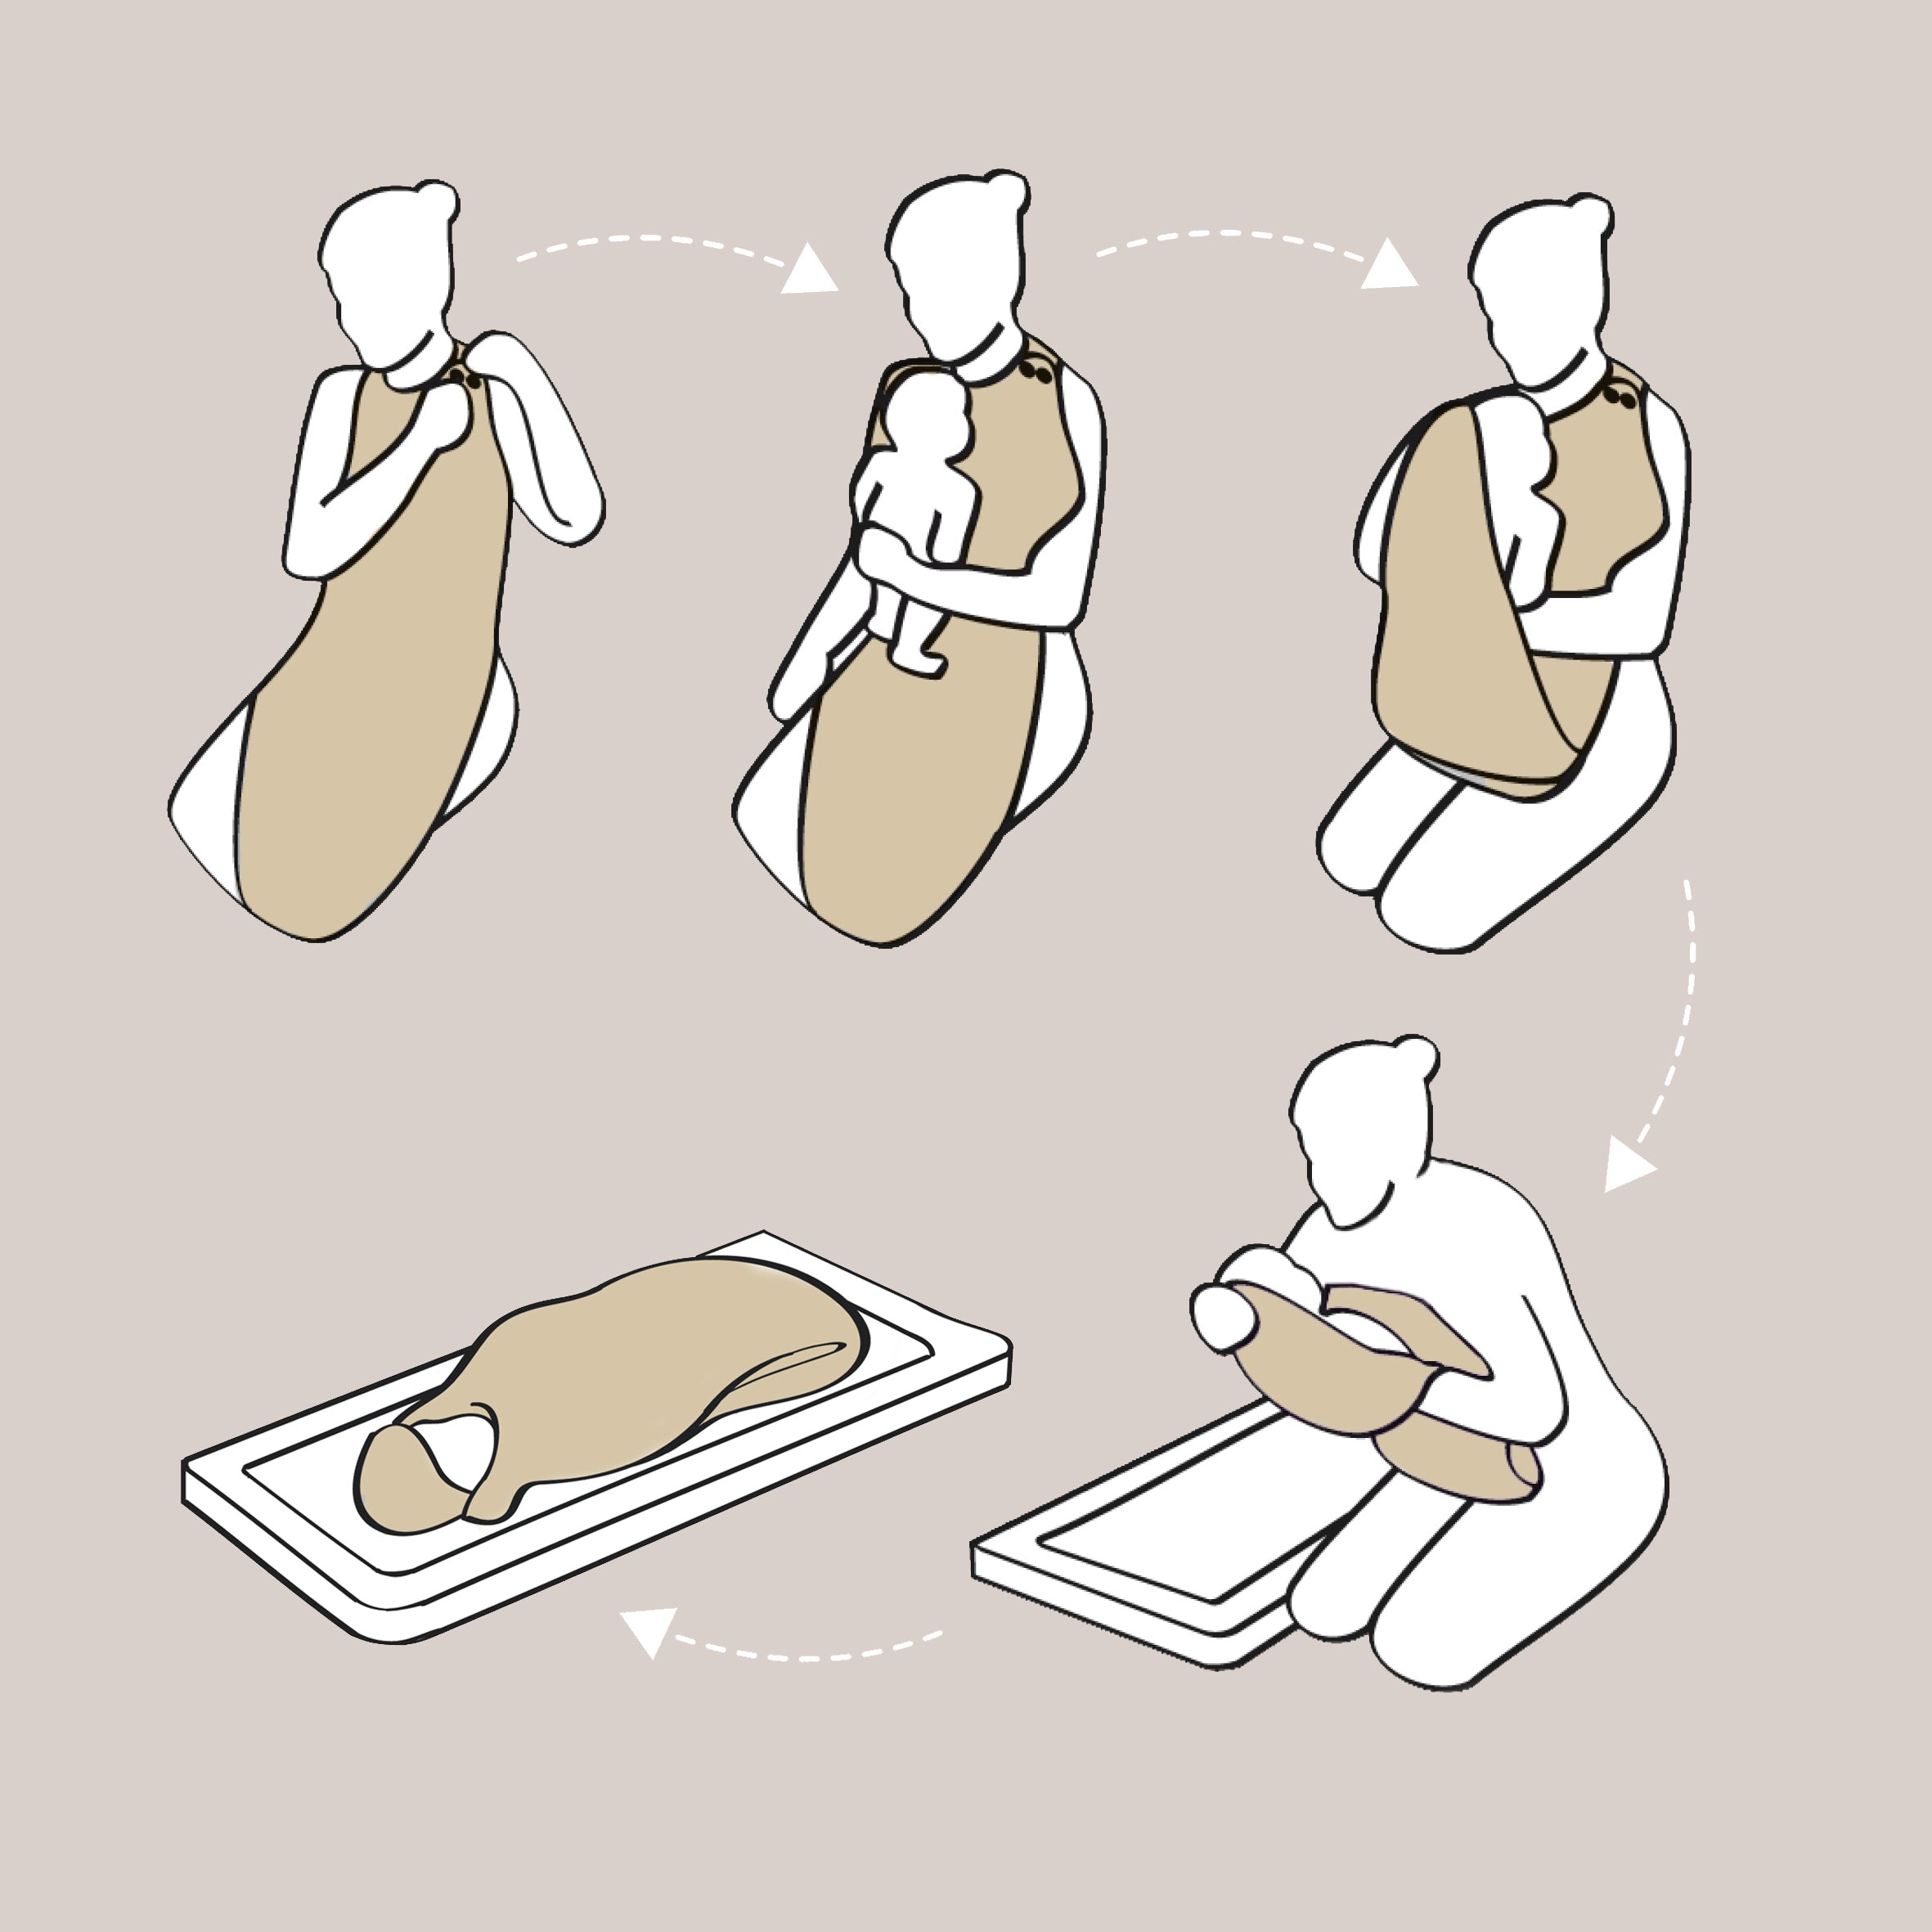 How to use Cuddledry handsfree towel